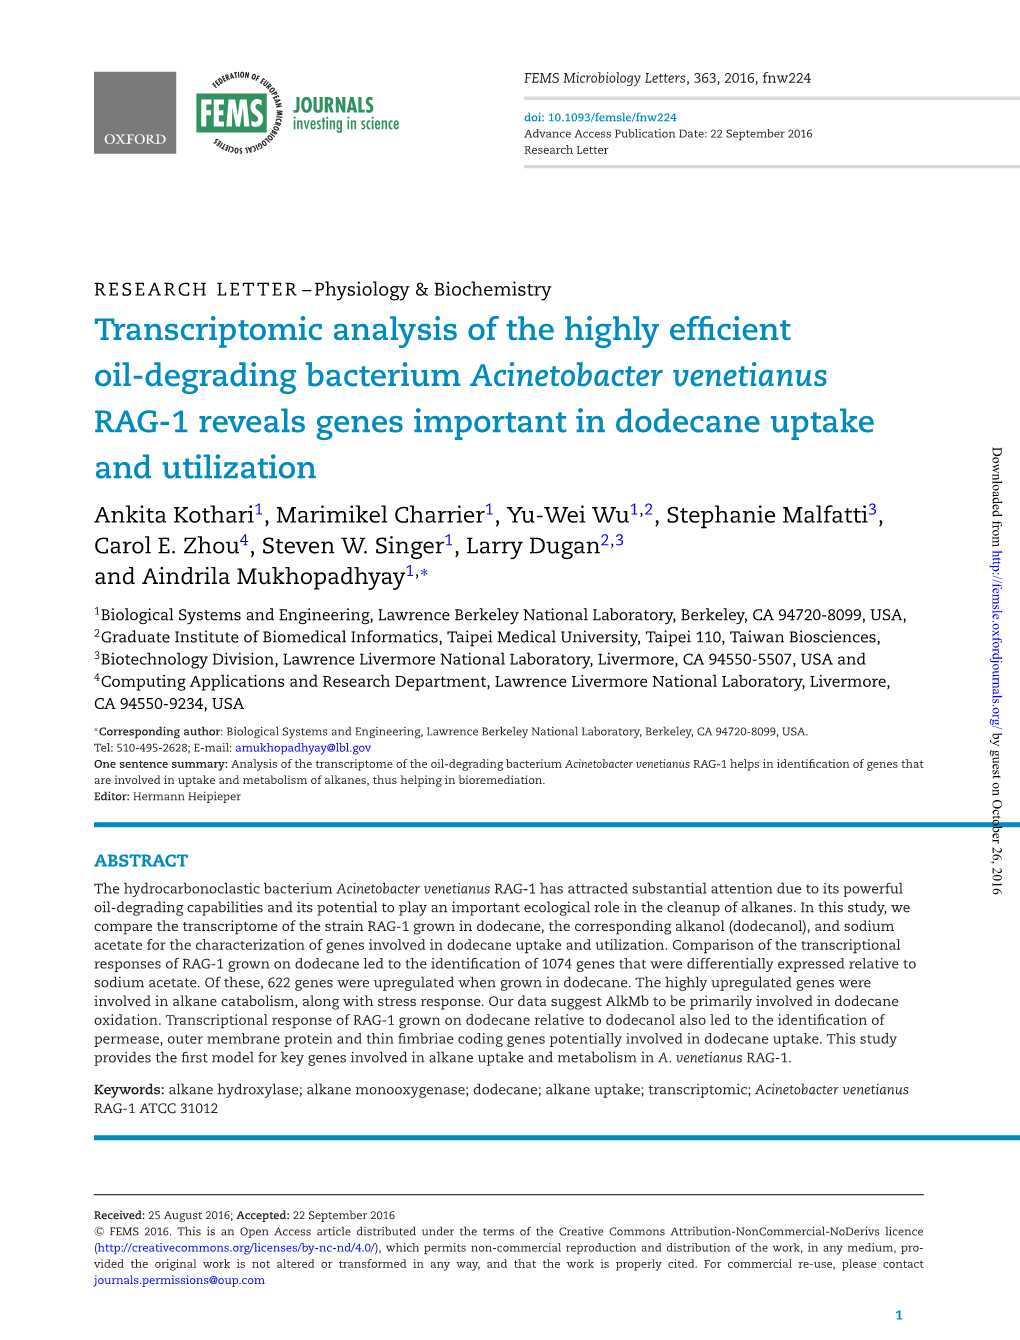 Transcriptomic Analysis of the Highly Efficient Oil-Degrading Bacterium